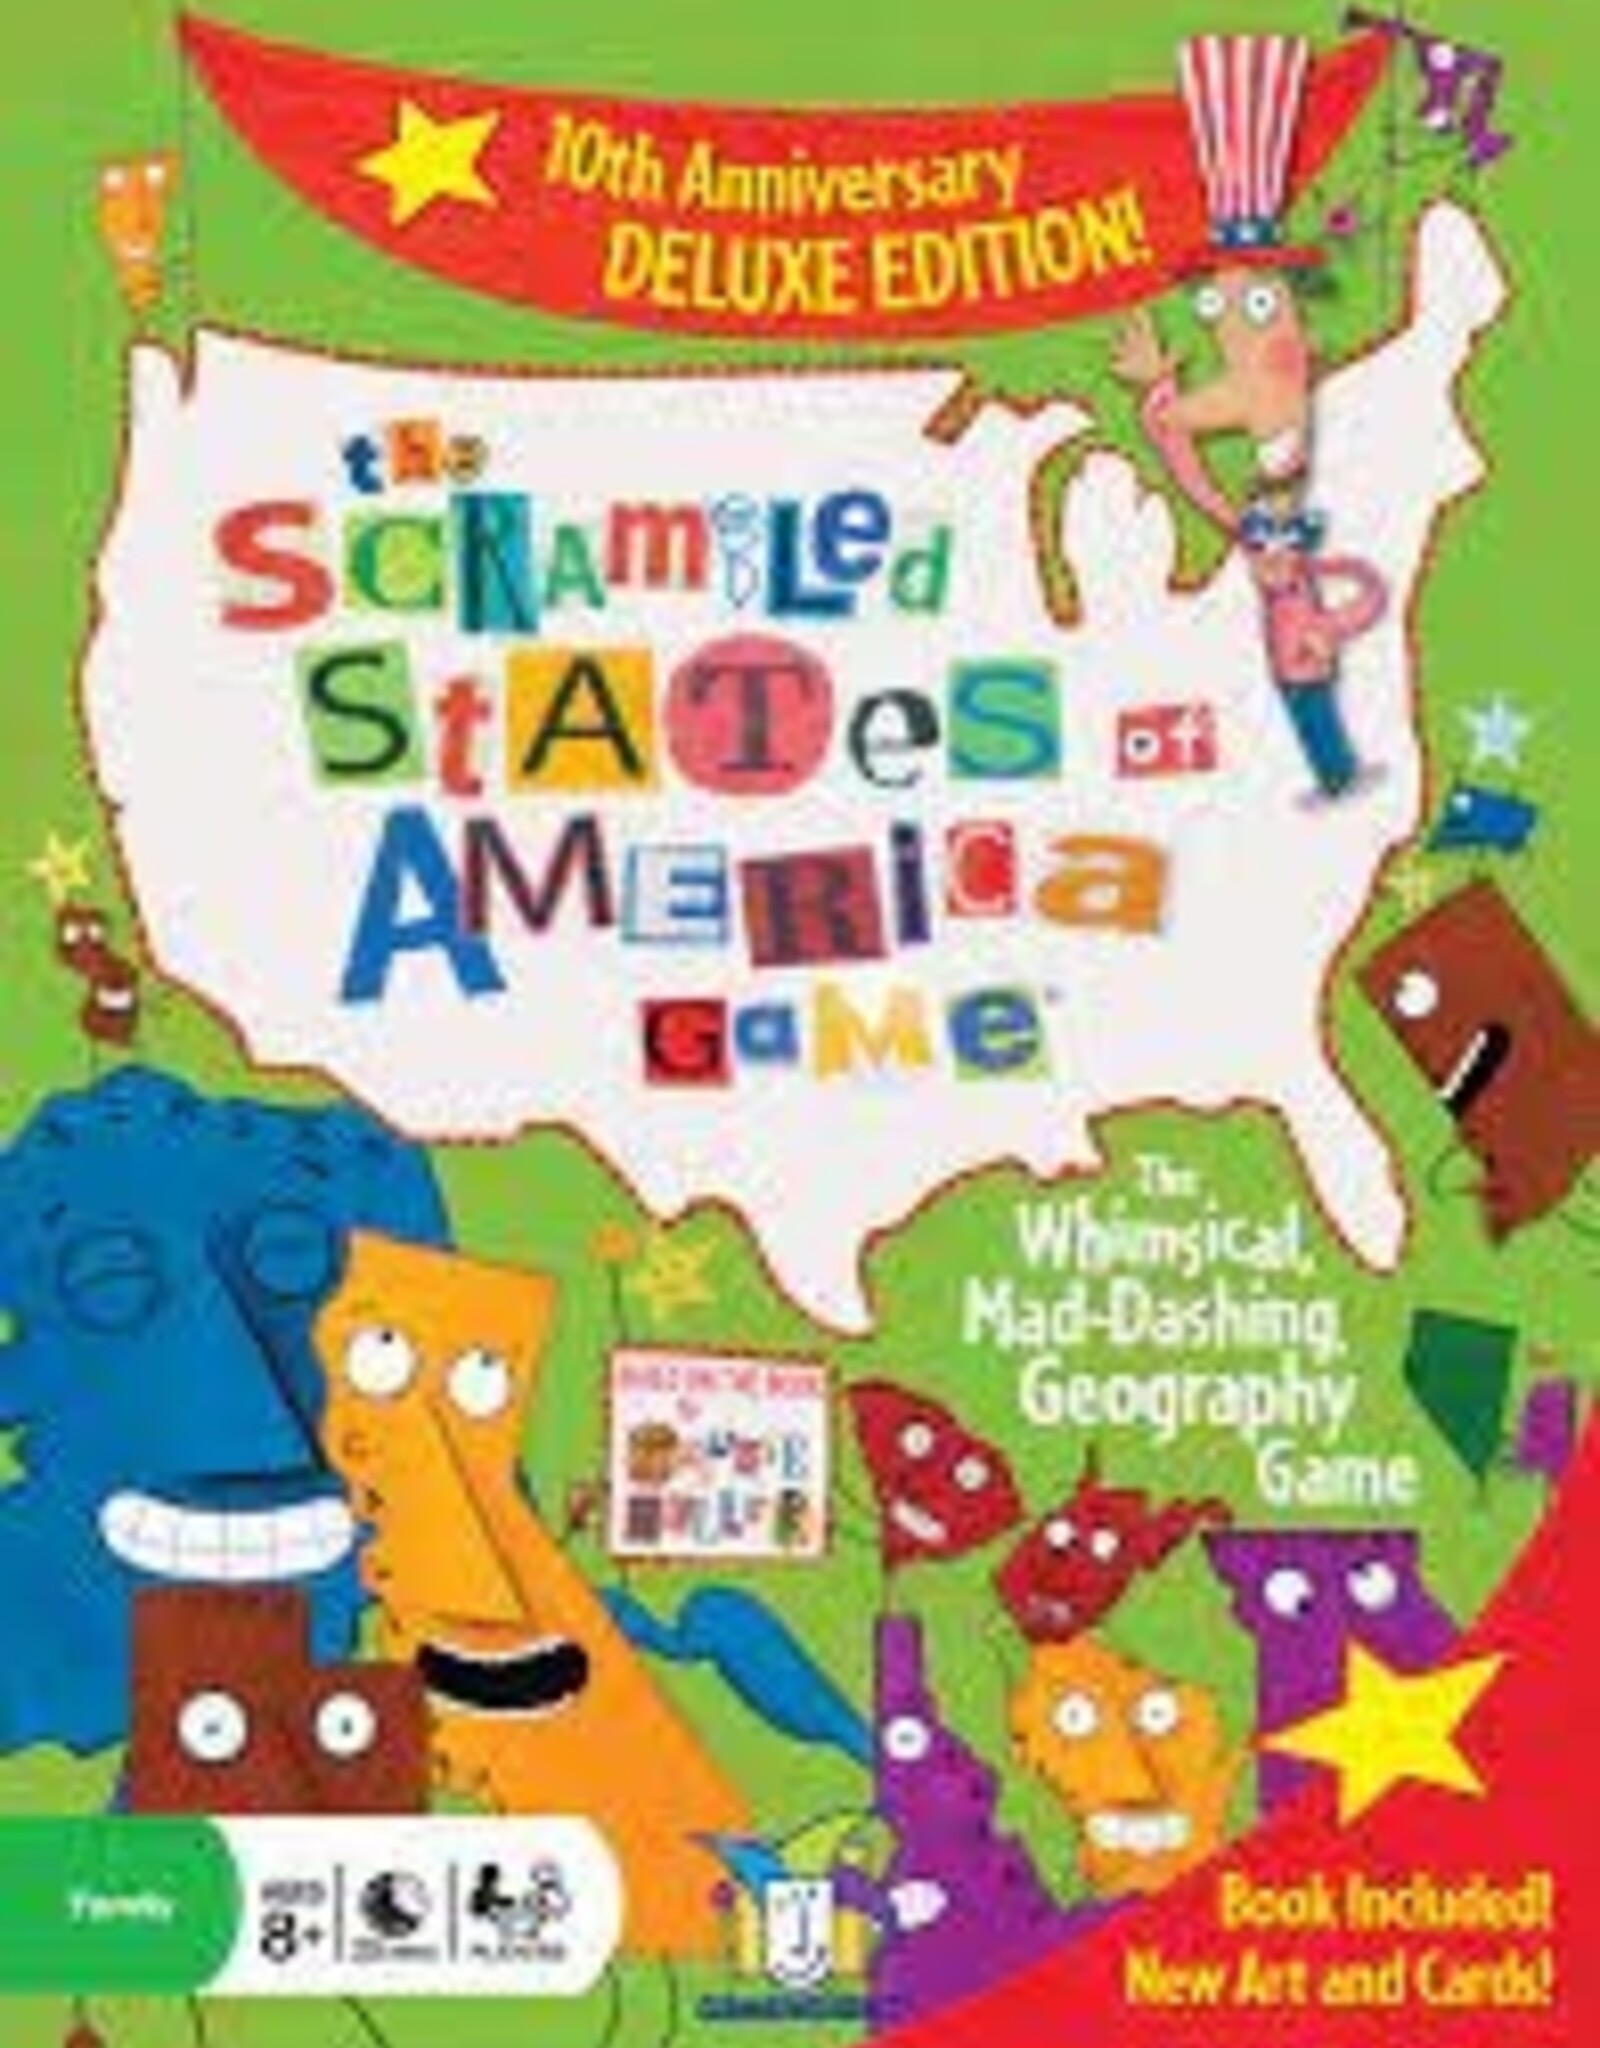 GAMEWRIGHT Scrambled States Of America Deluxe Collector's Edition